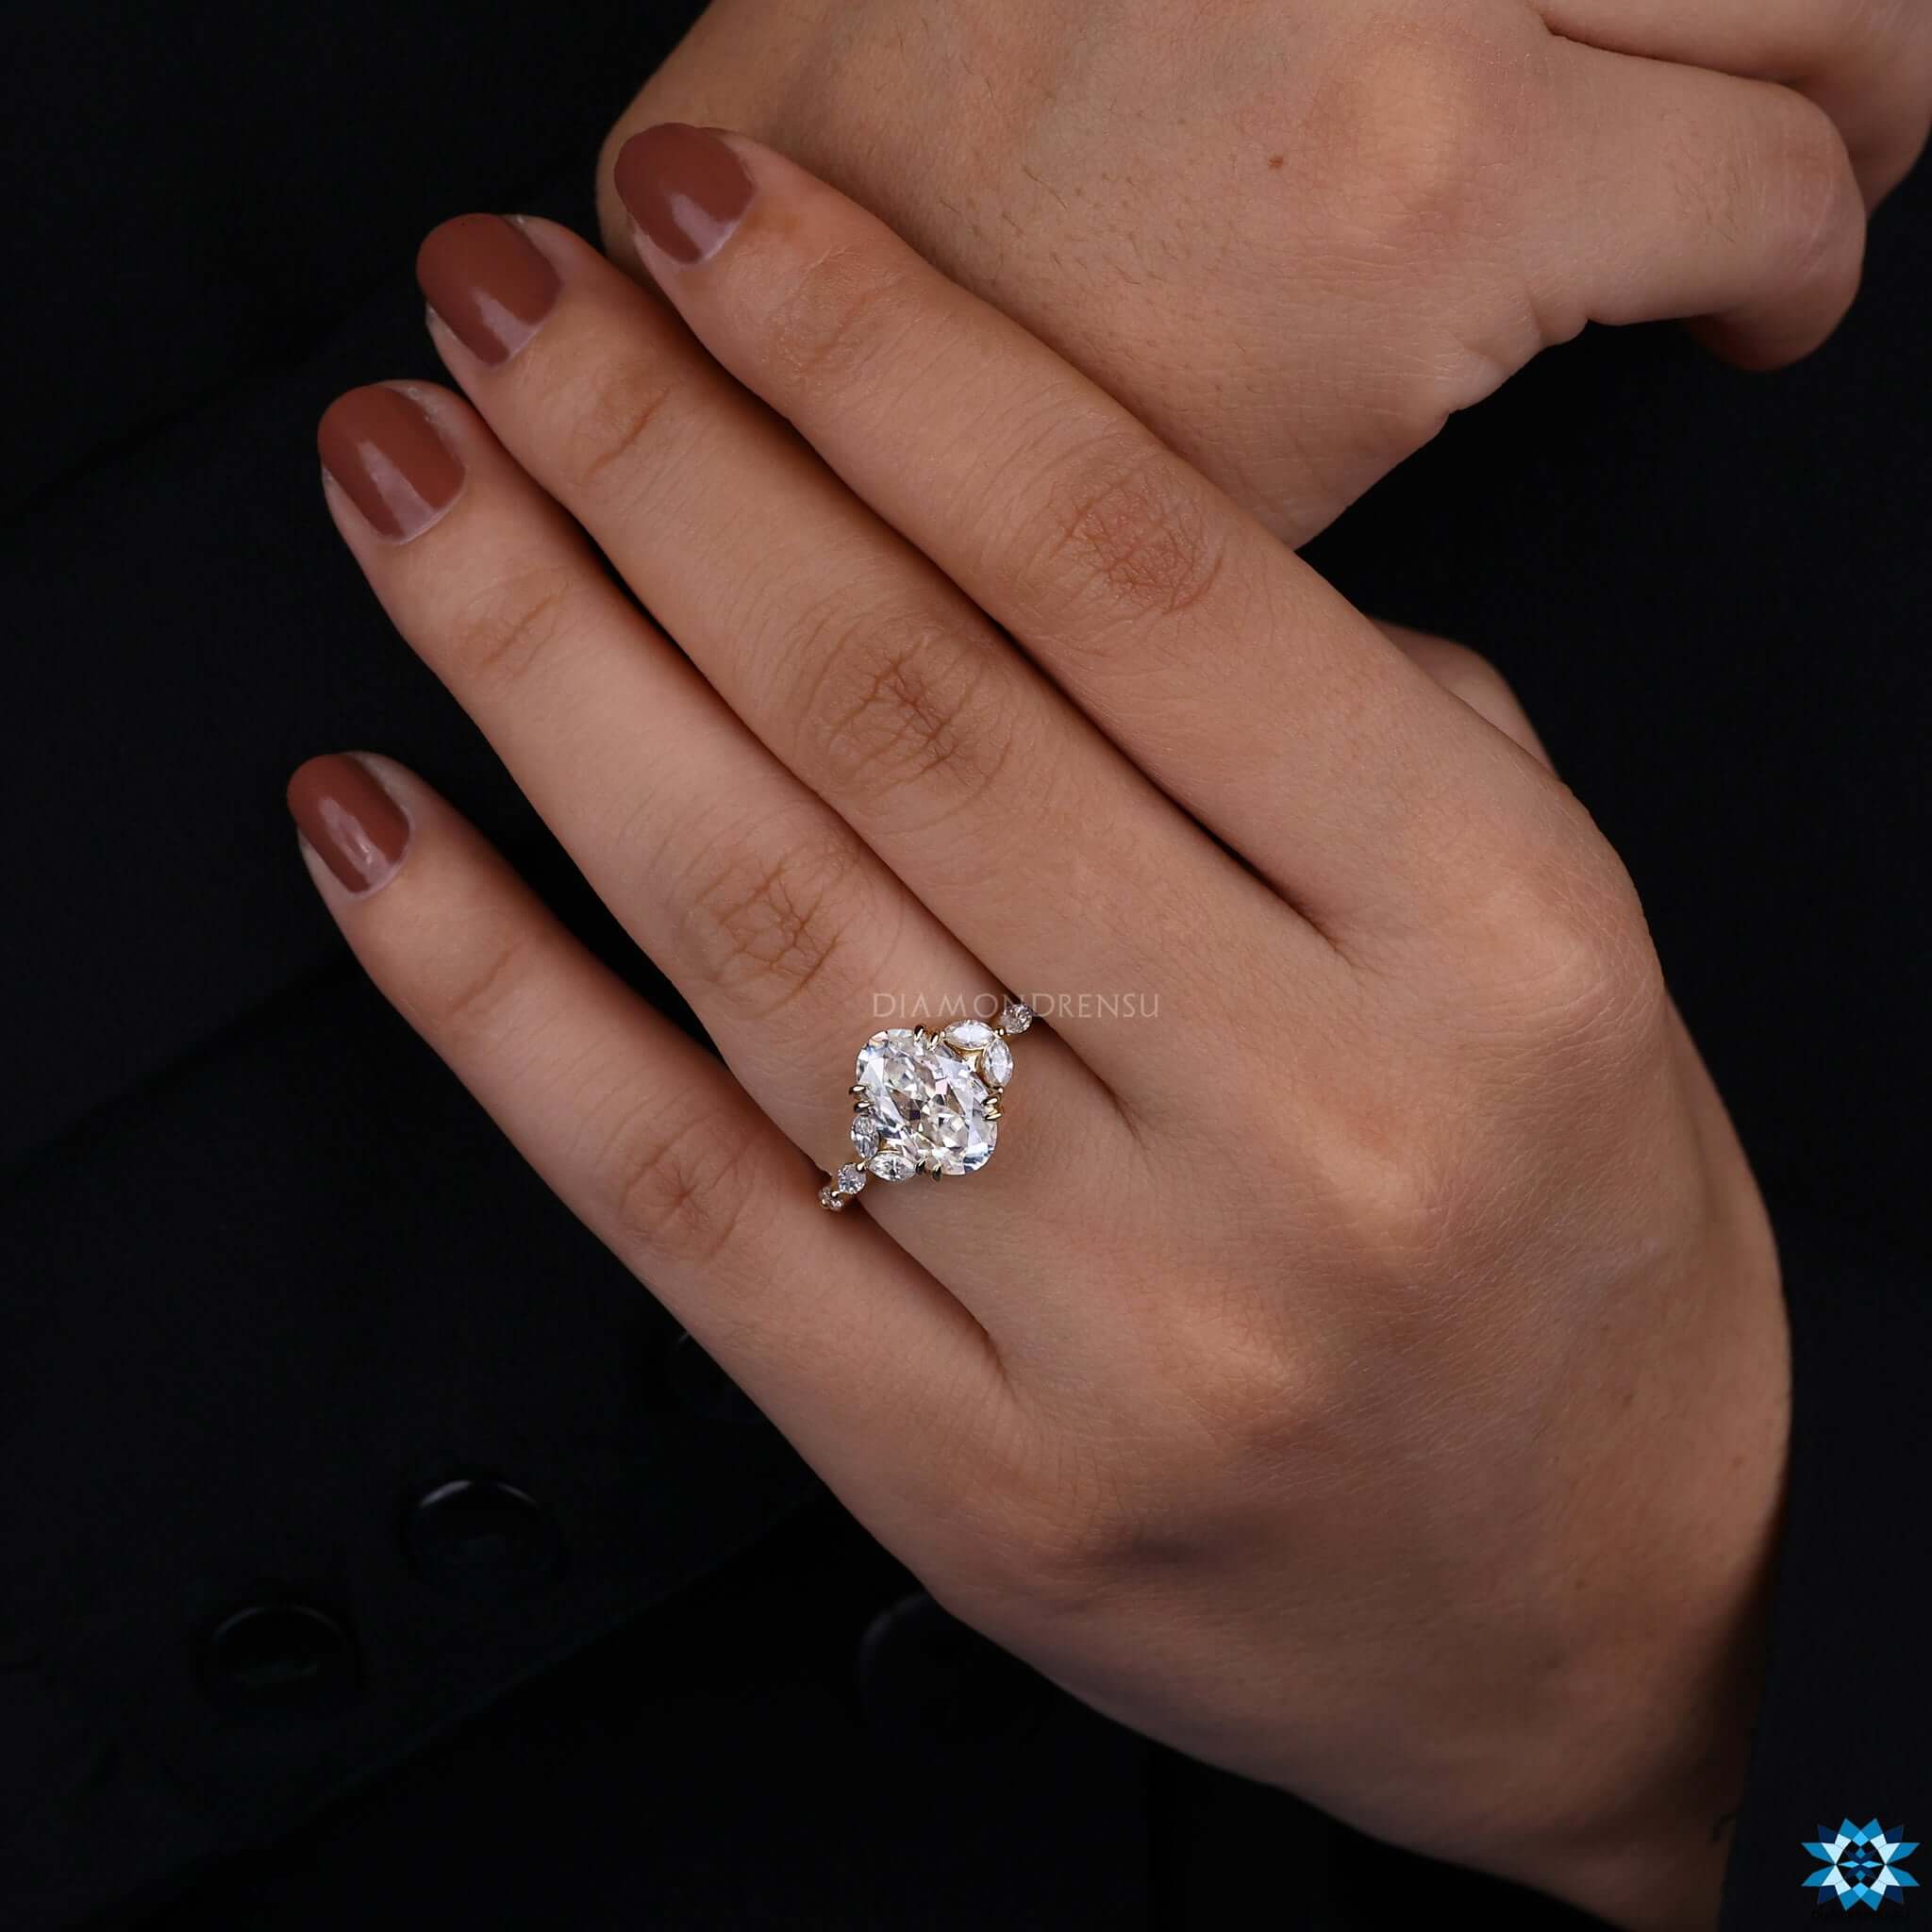 Radiant marquise moissanite gemstone, perfect for any occasion